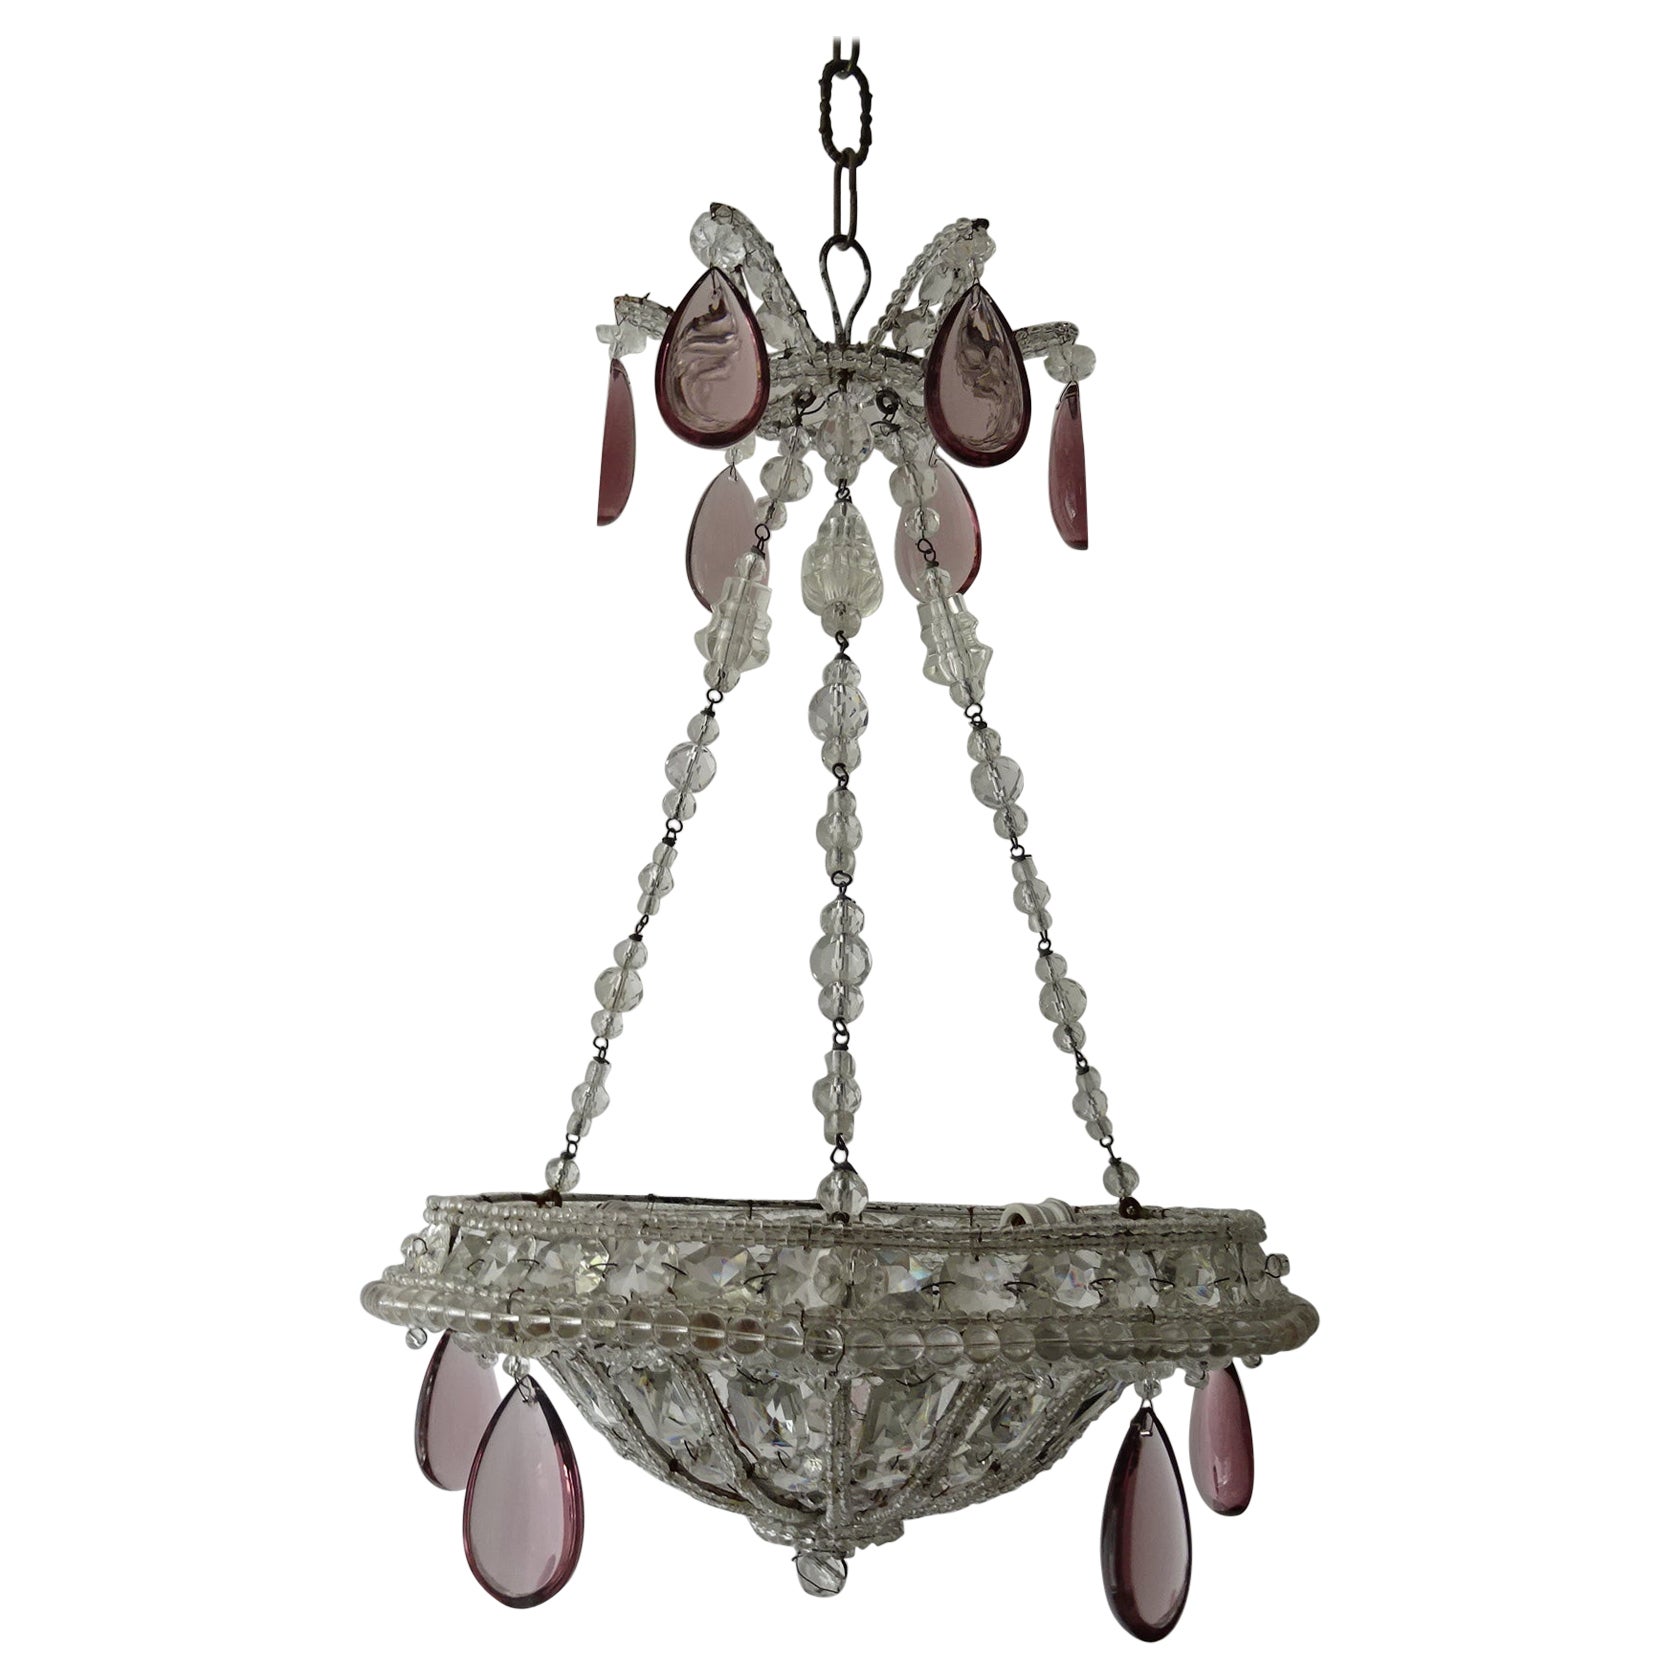  Maison Baguès 1940s Amethyst Prisms Beaded Crystal Chains Signed Chandelier